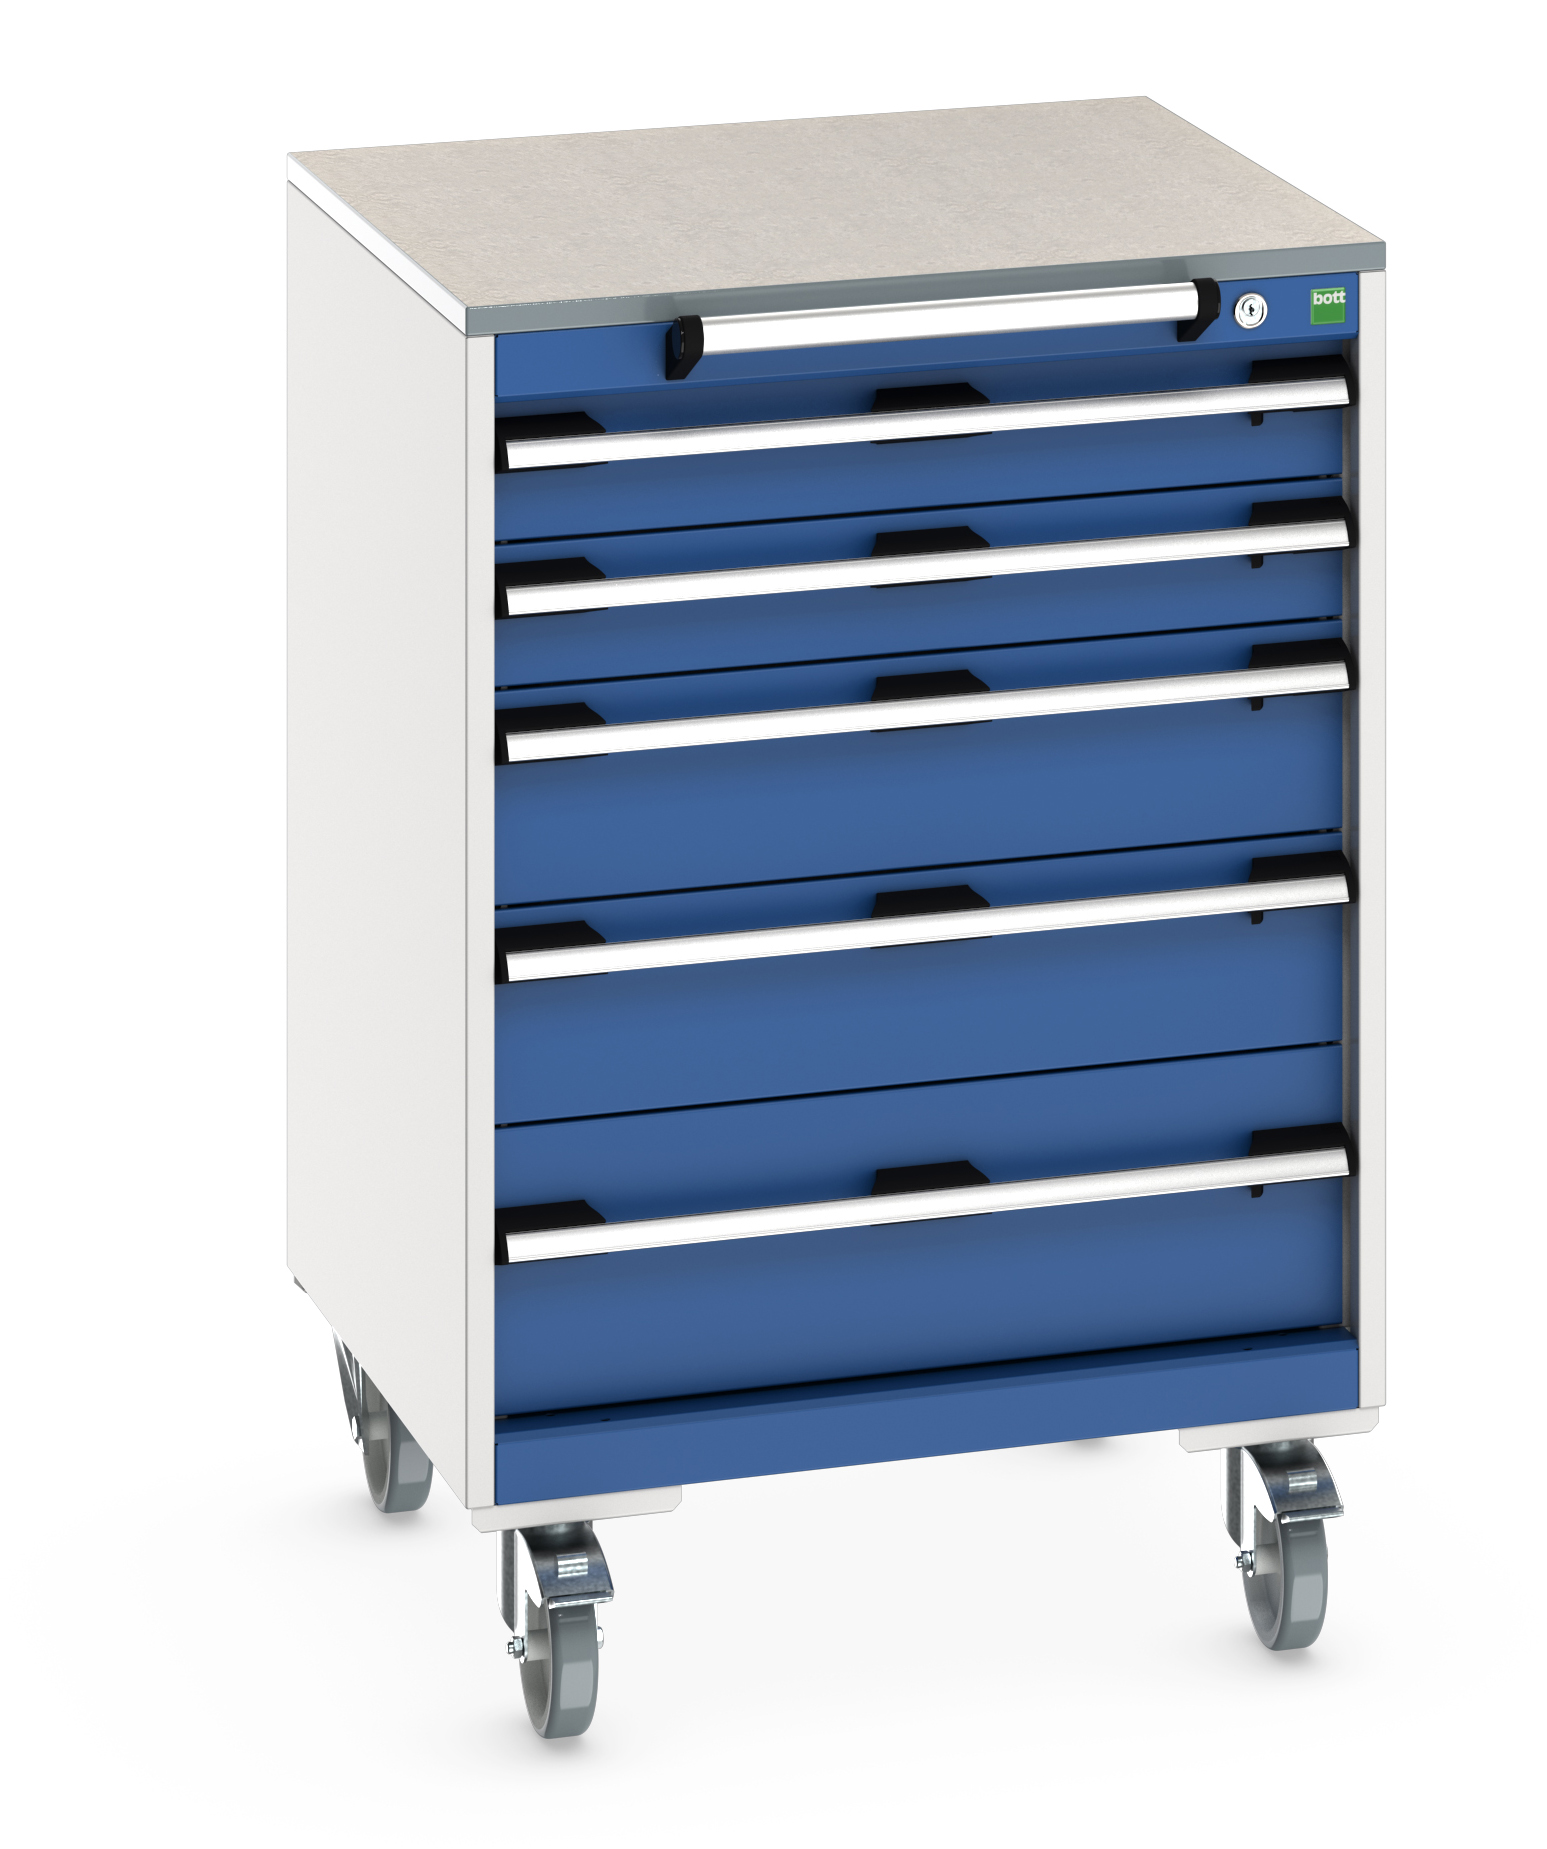 Bott Cubio Mobile Drawer Cabinet With 5 Drawers & Lino Worktop - 40402150.11V